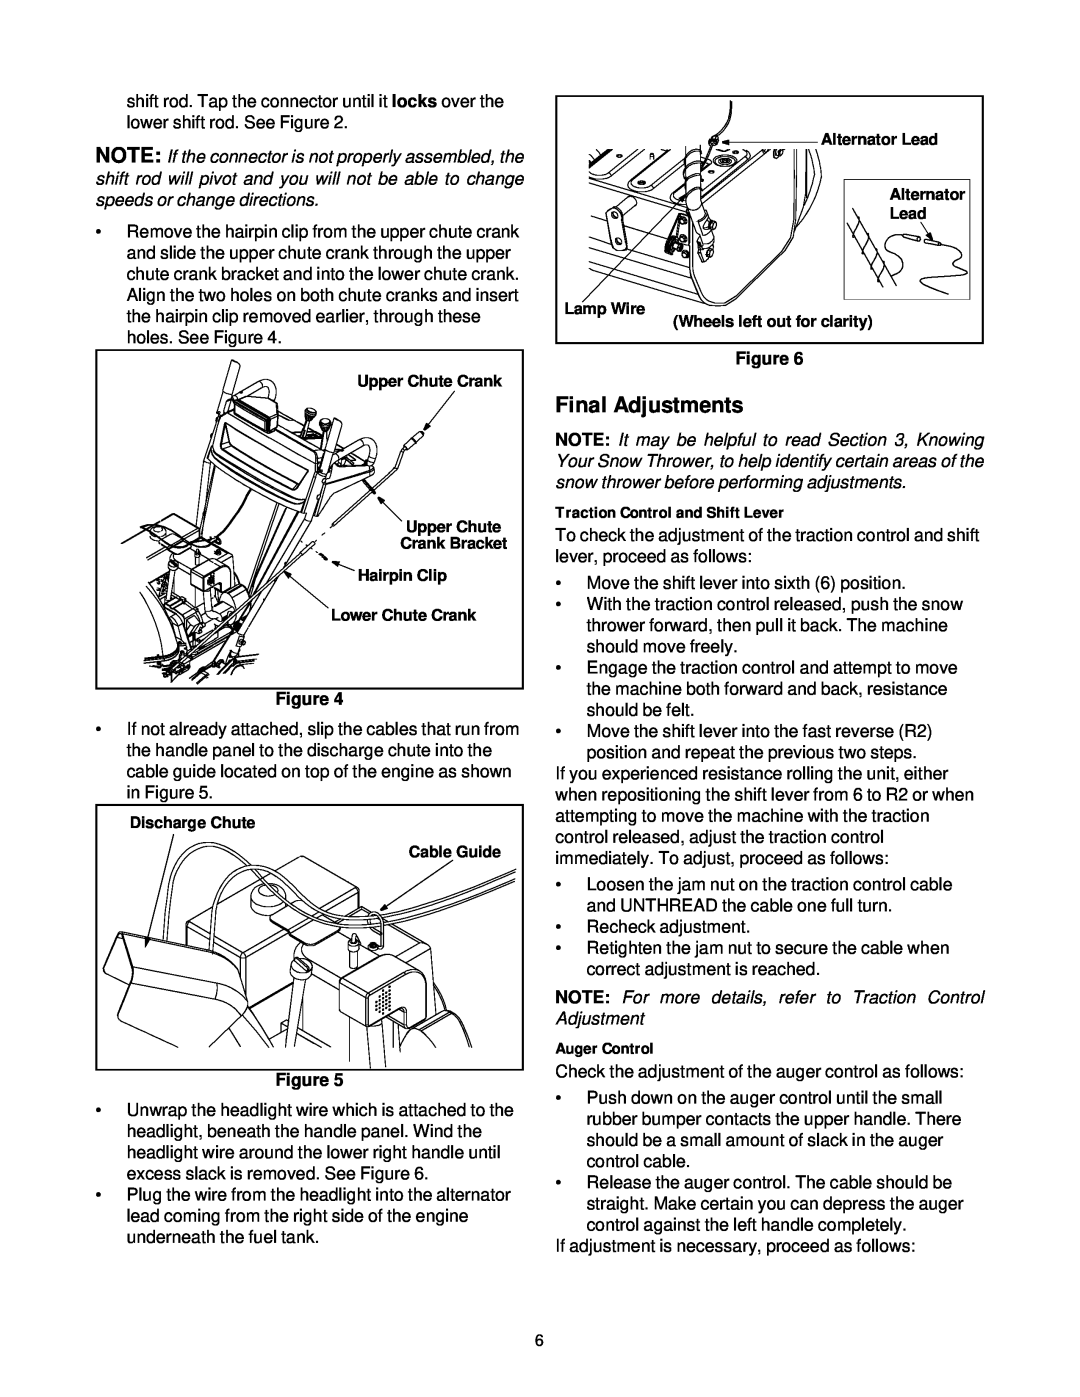 Yard-Man 31AE993I401 manual Final Adjustments, Traction Control and Shift Lever, Auger Control, Figure 